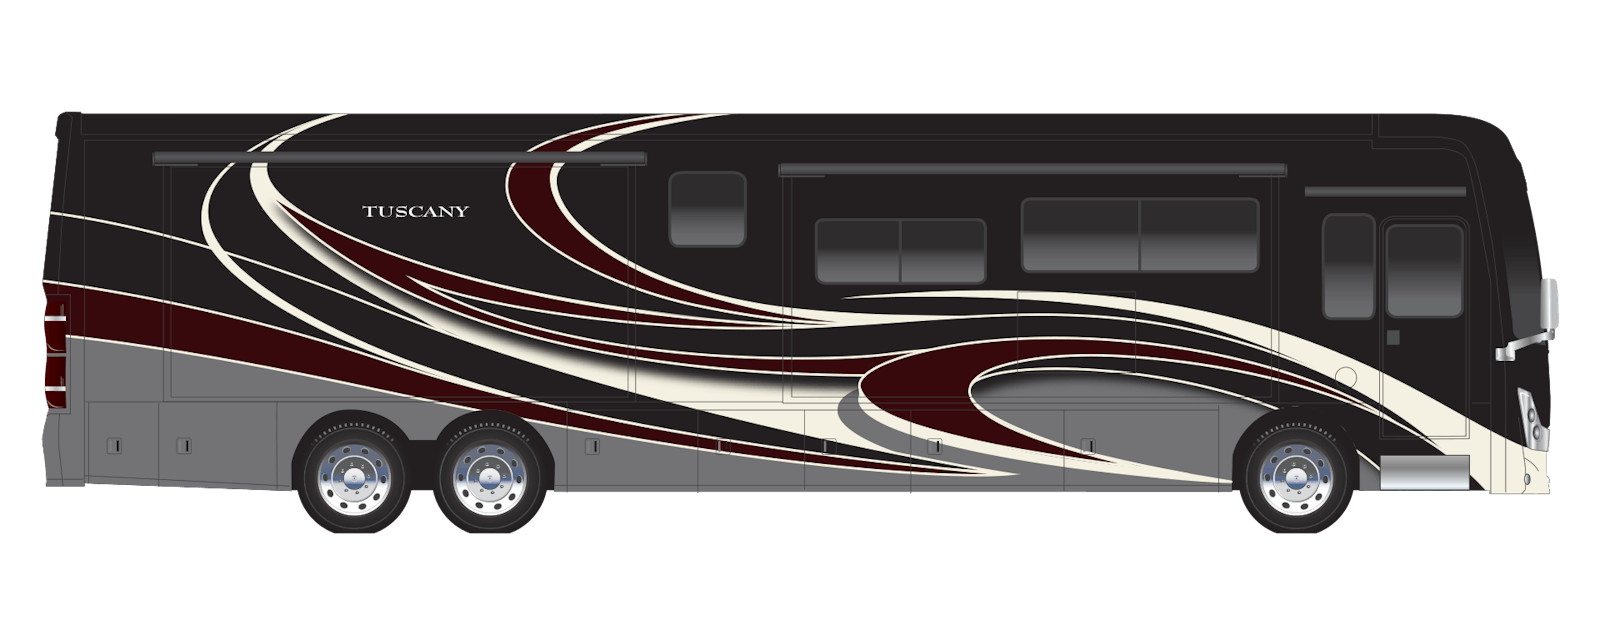 2022 Thor Tuscany Class A Diesel Pusher RV Meridian Full Body Paint Exterior Artwork